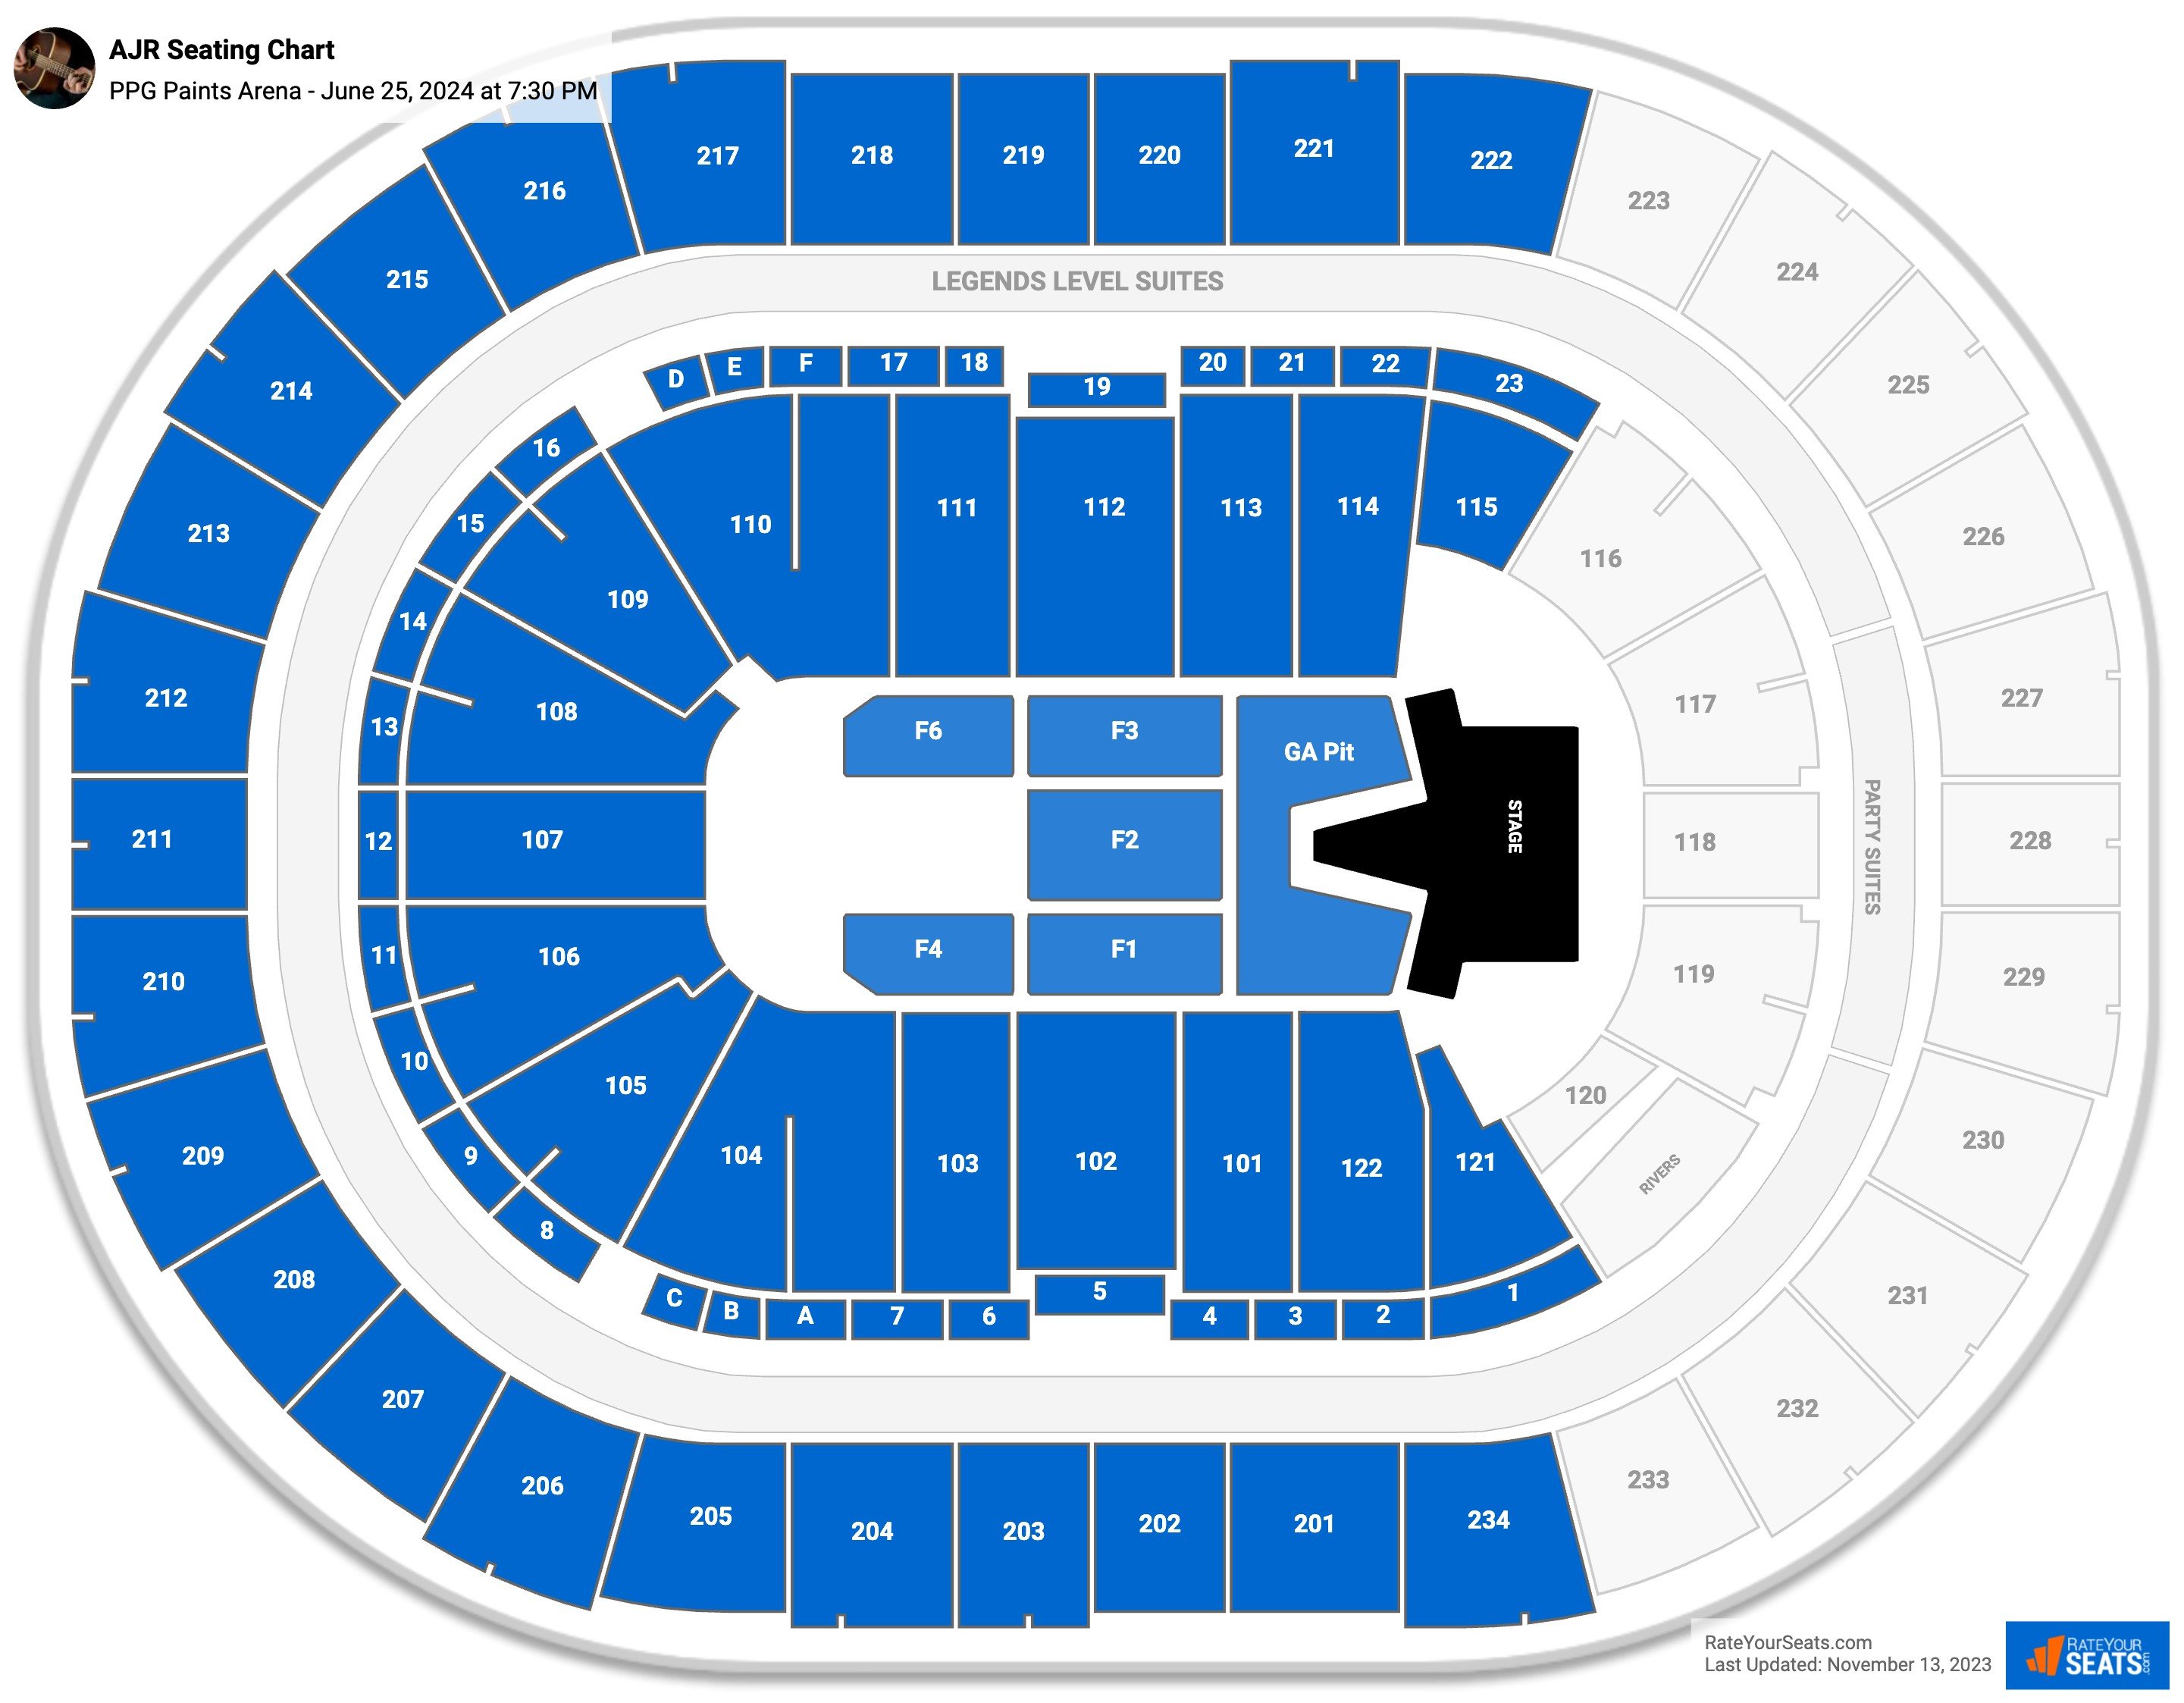 PPG Paints Arena Concert Seating Chart - RateYourSeats.com